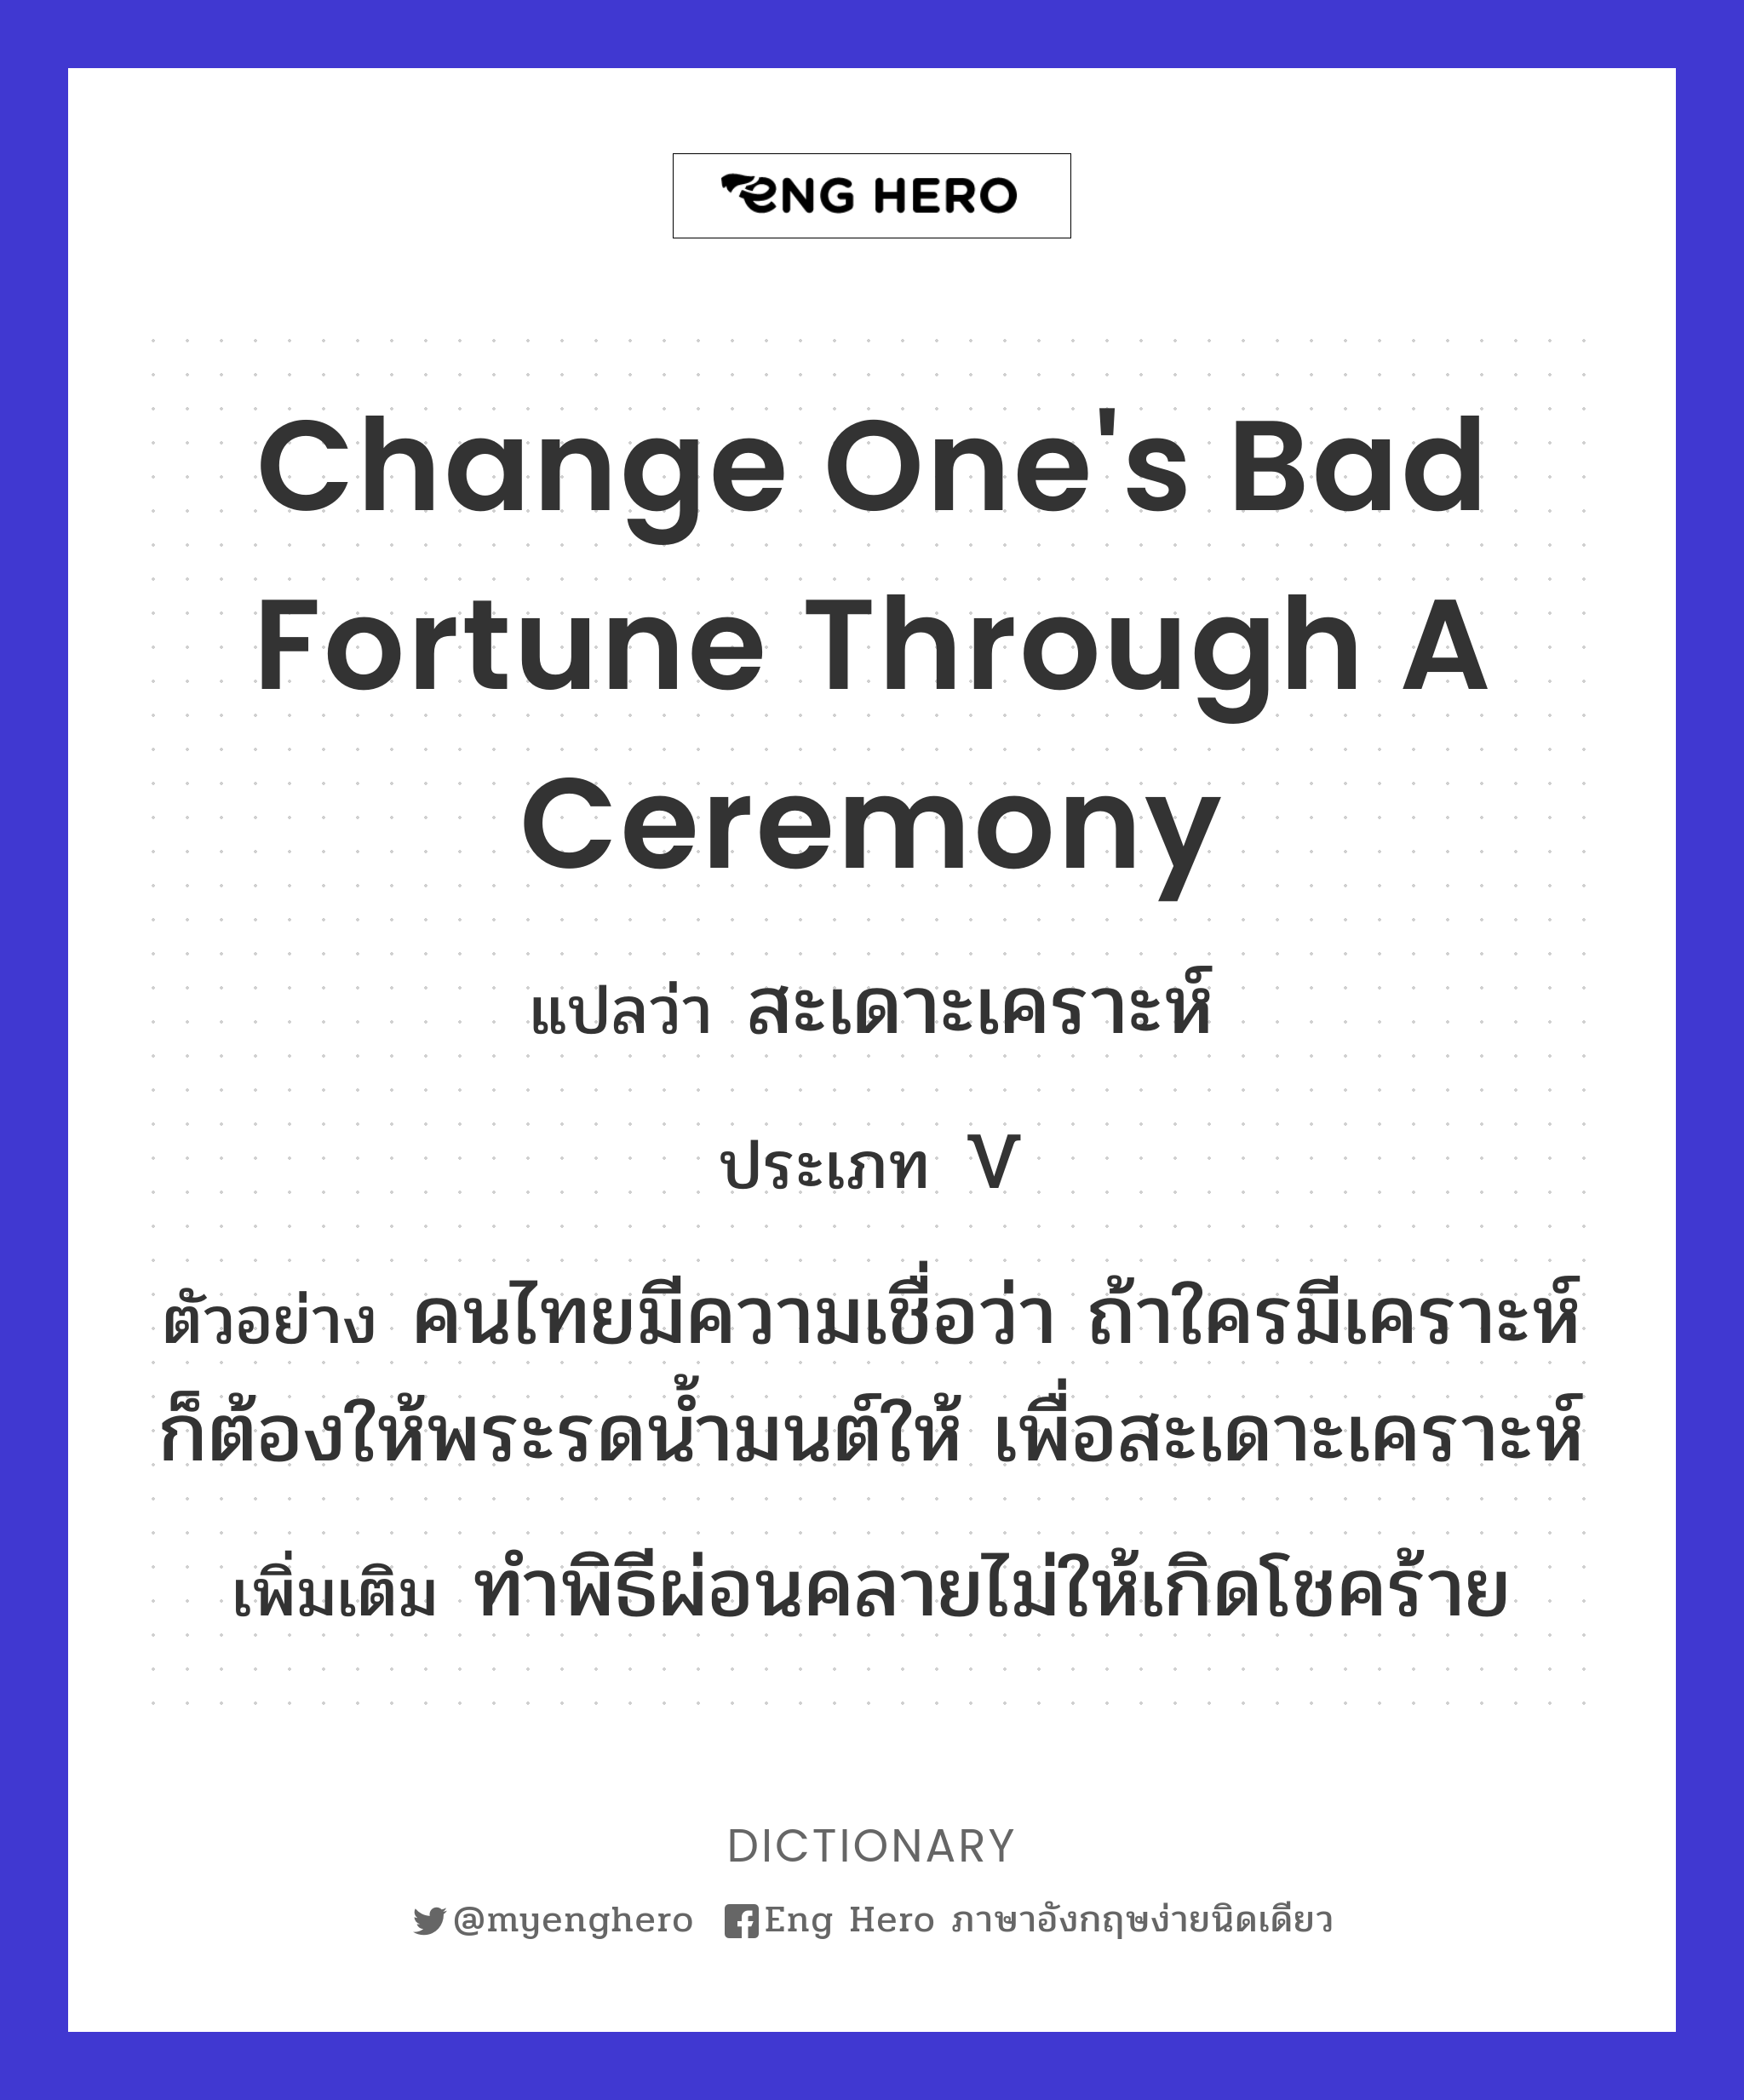 change one's bad fortune through a ceremony